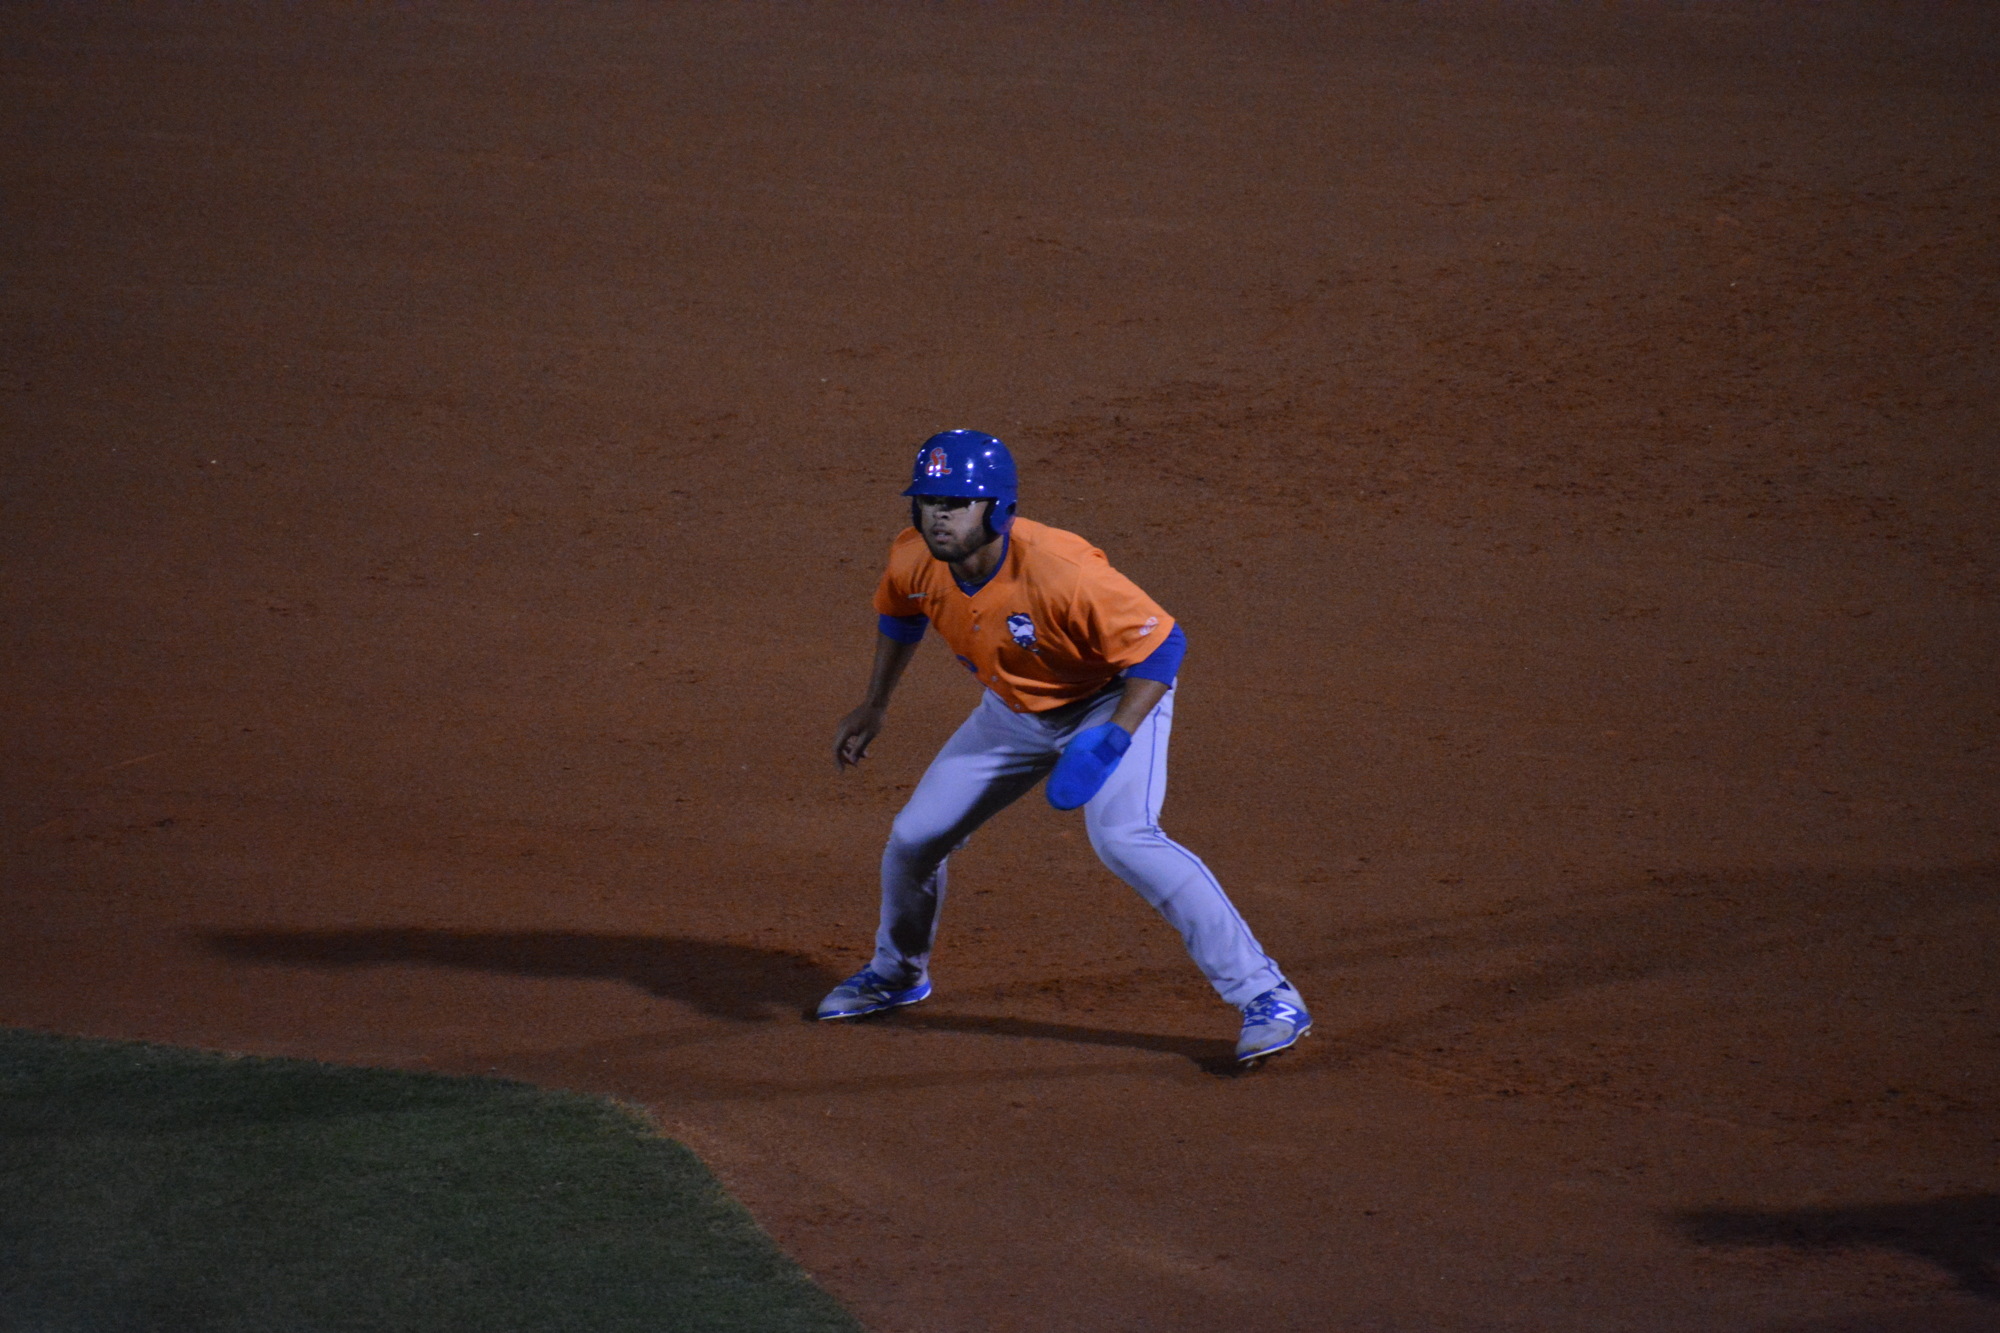 Desmond Lindsay gets a lead off first base following his base hit.